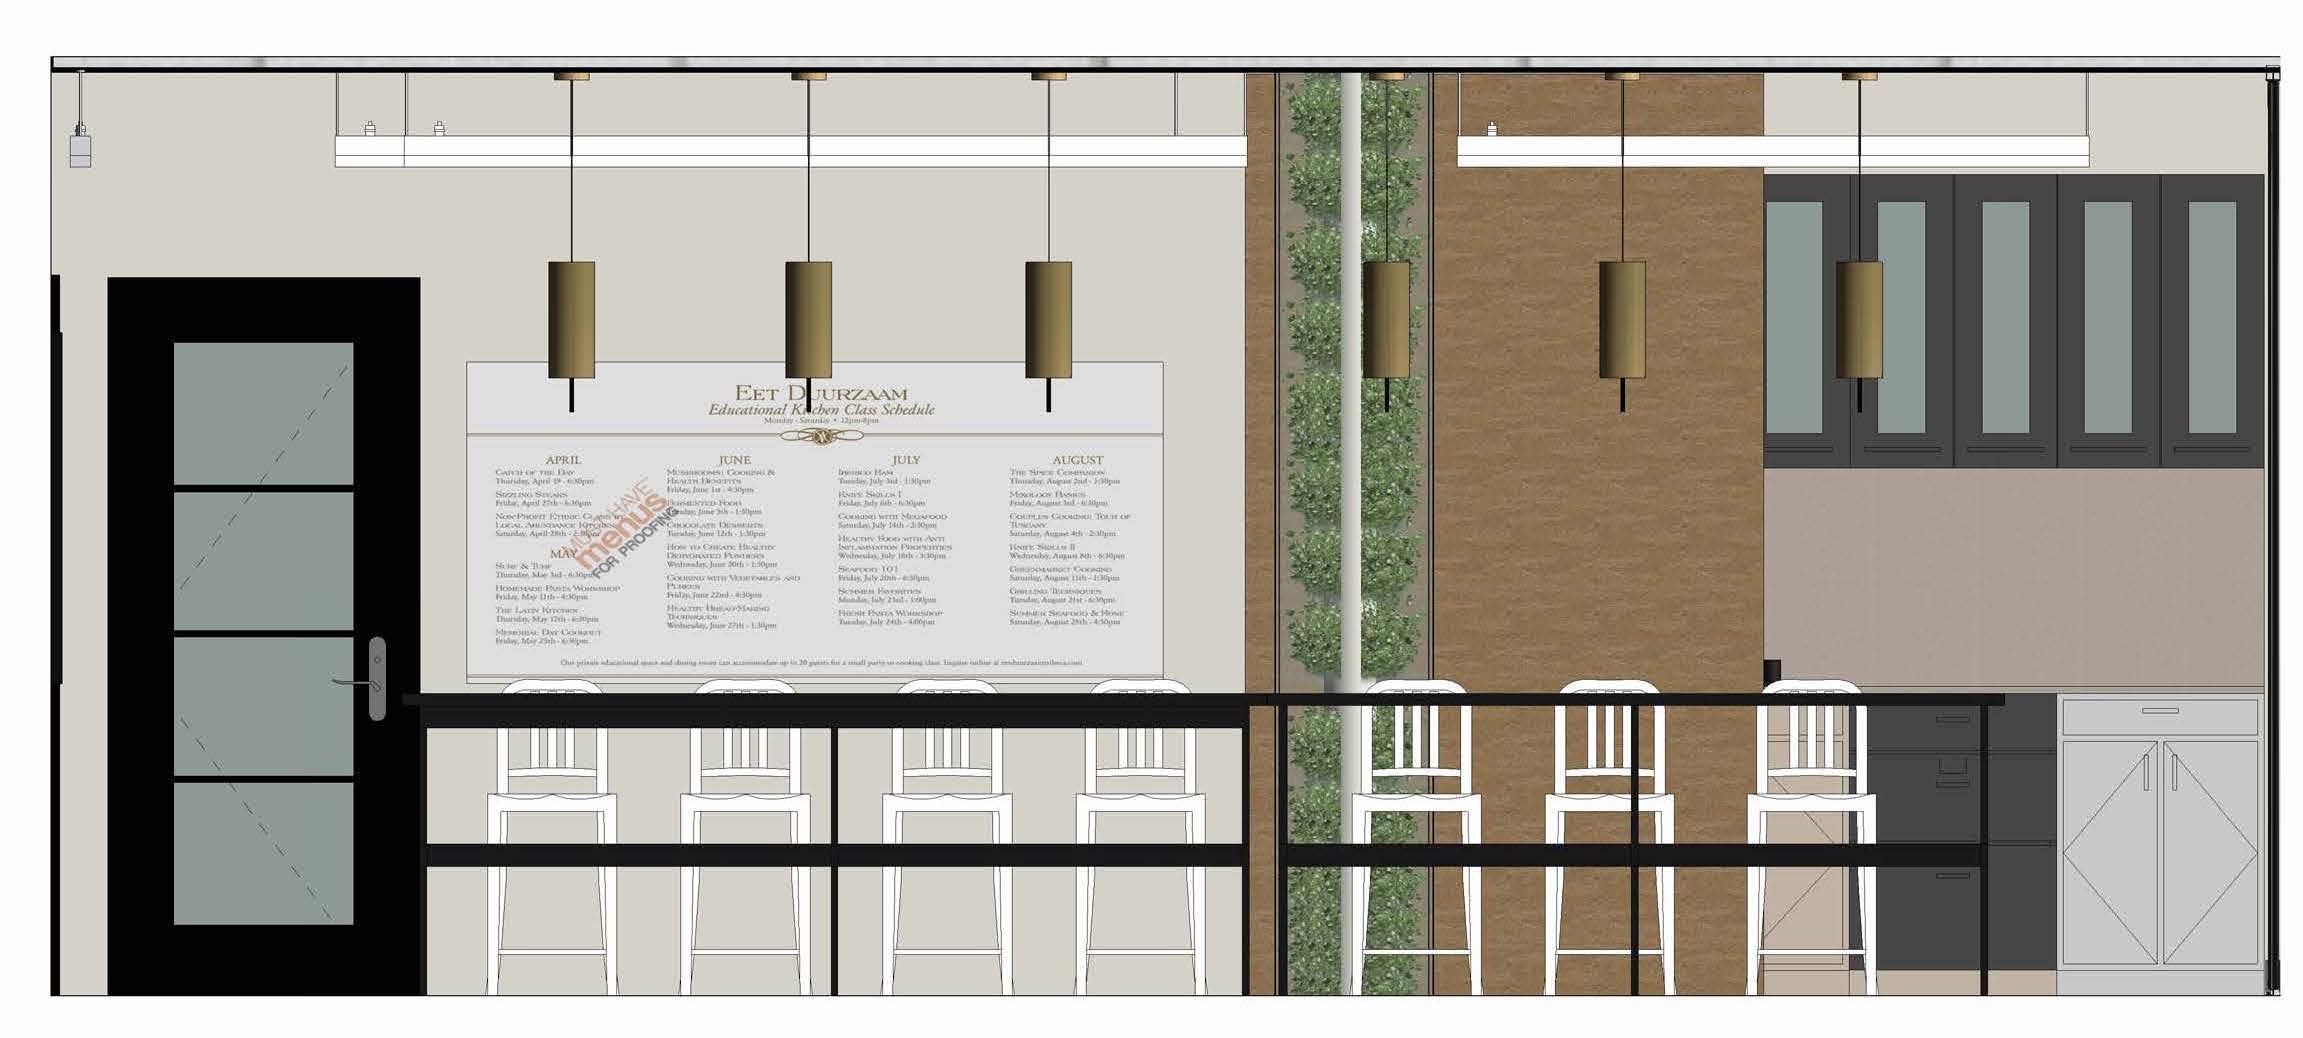 752 Restaurant Design_Floor Plan_Midterm_purged(Recovery)(Recovery)(Recovery) - Sheet - A134 - Unnamed.jpg